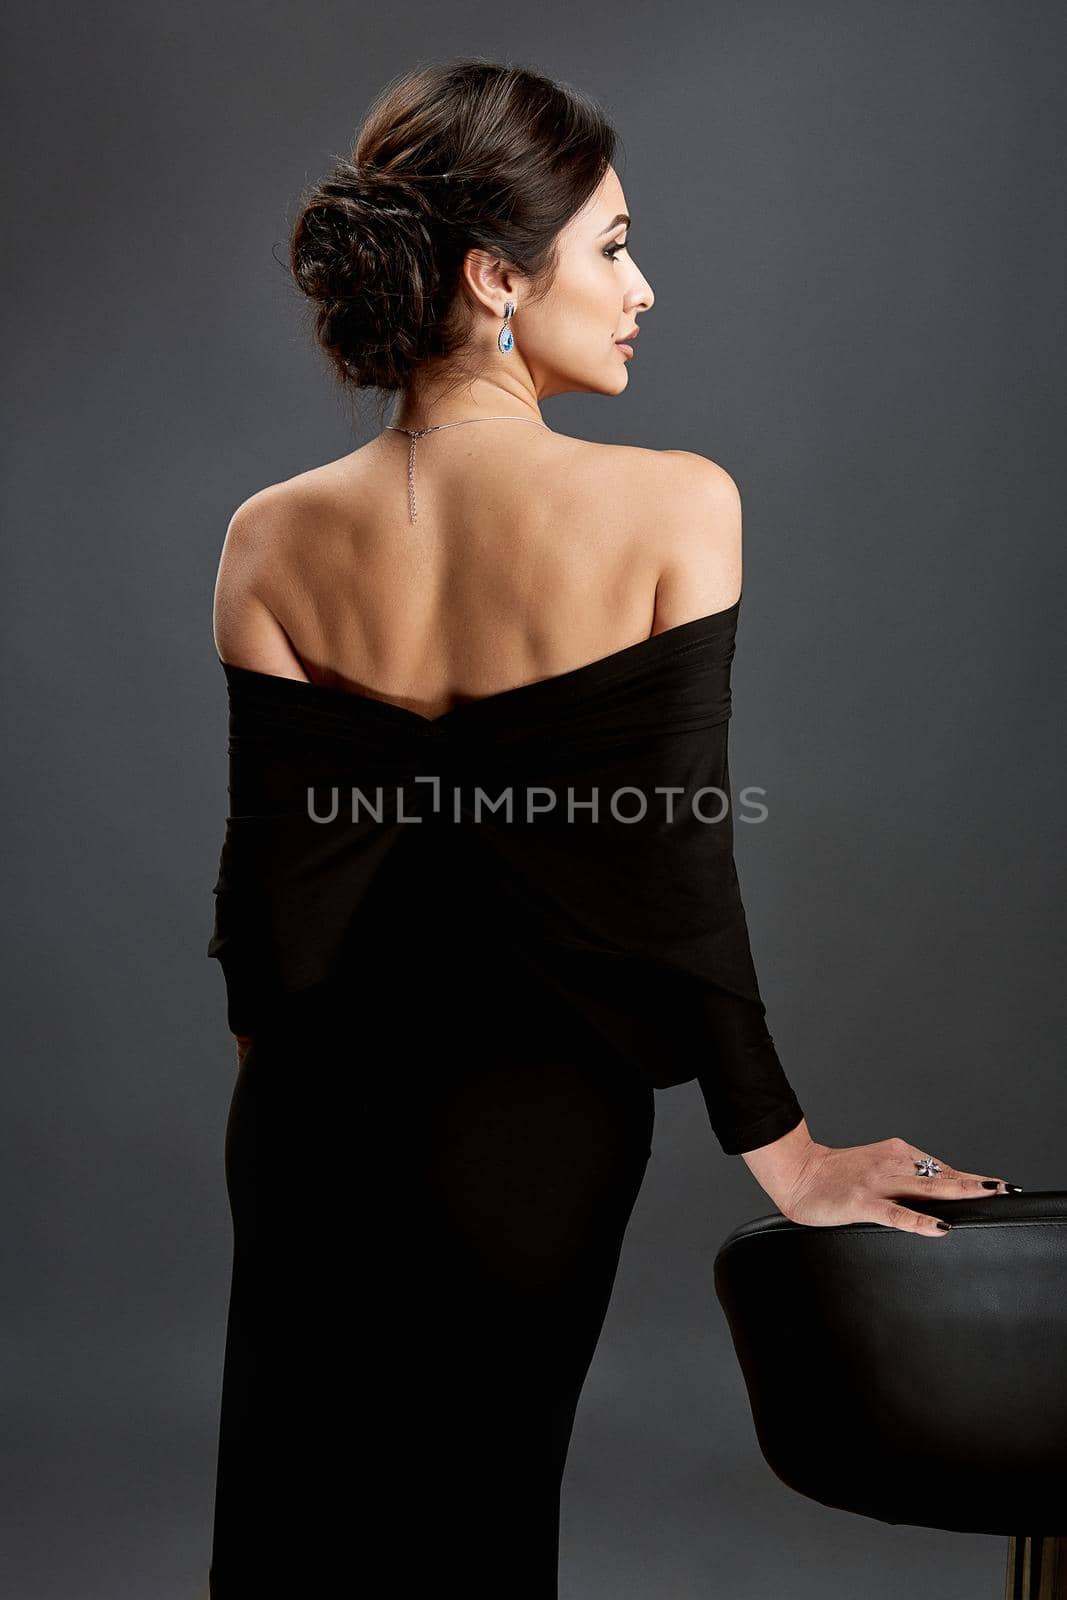 Beautiful woman standing in a black dress over gray background. A woman is standing back.